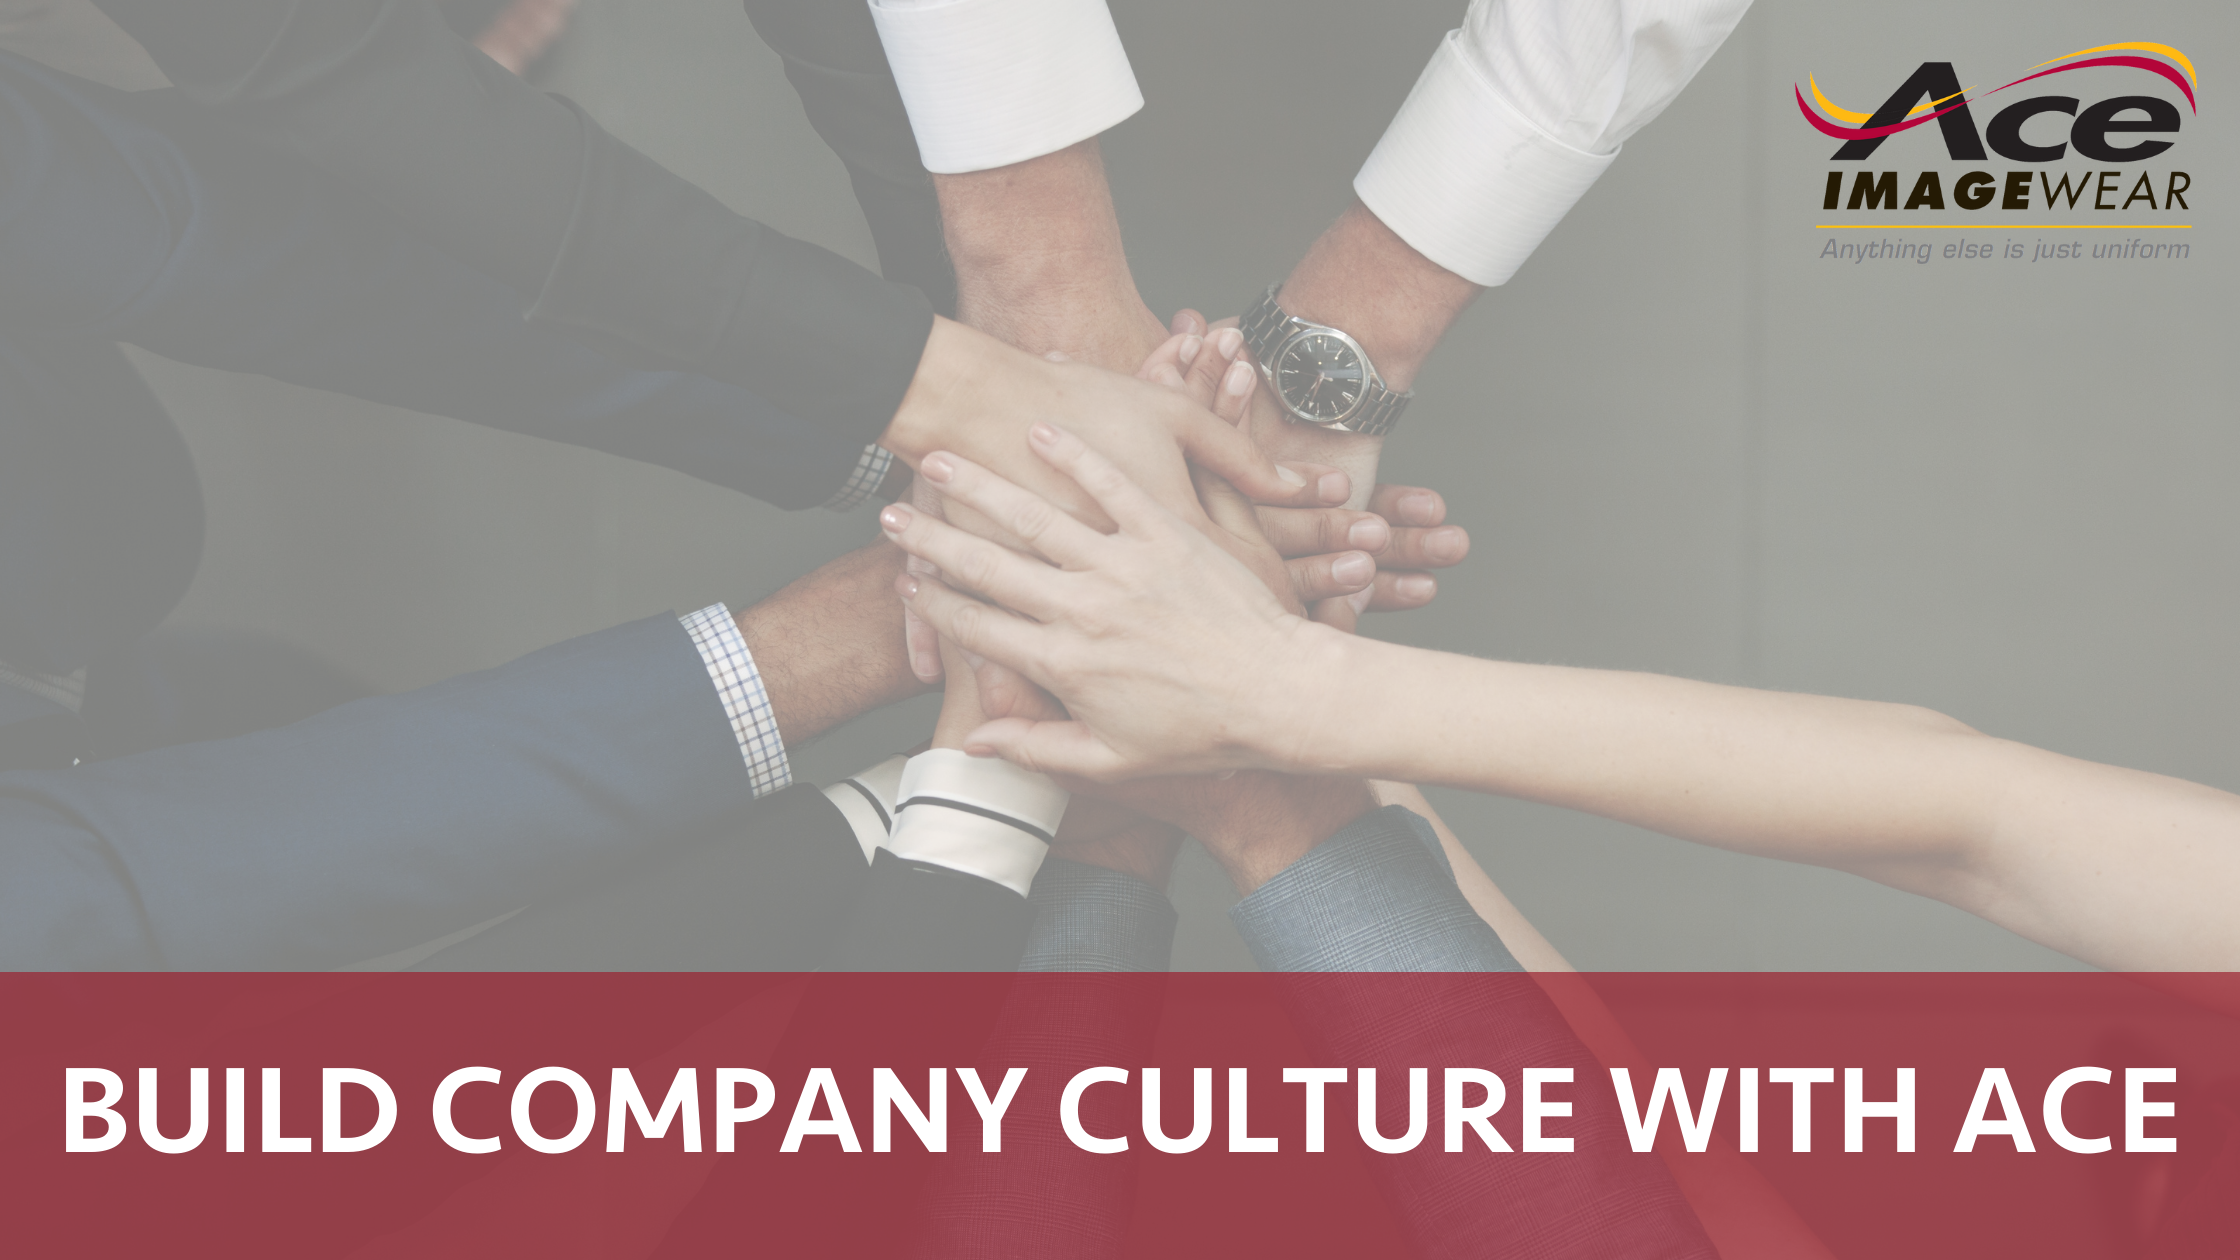 New Hire? No Problem. Build Company Culture with Ace.